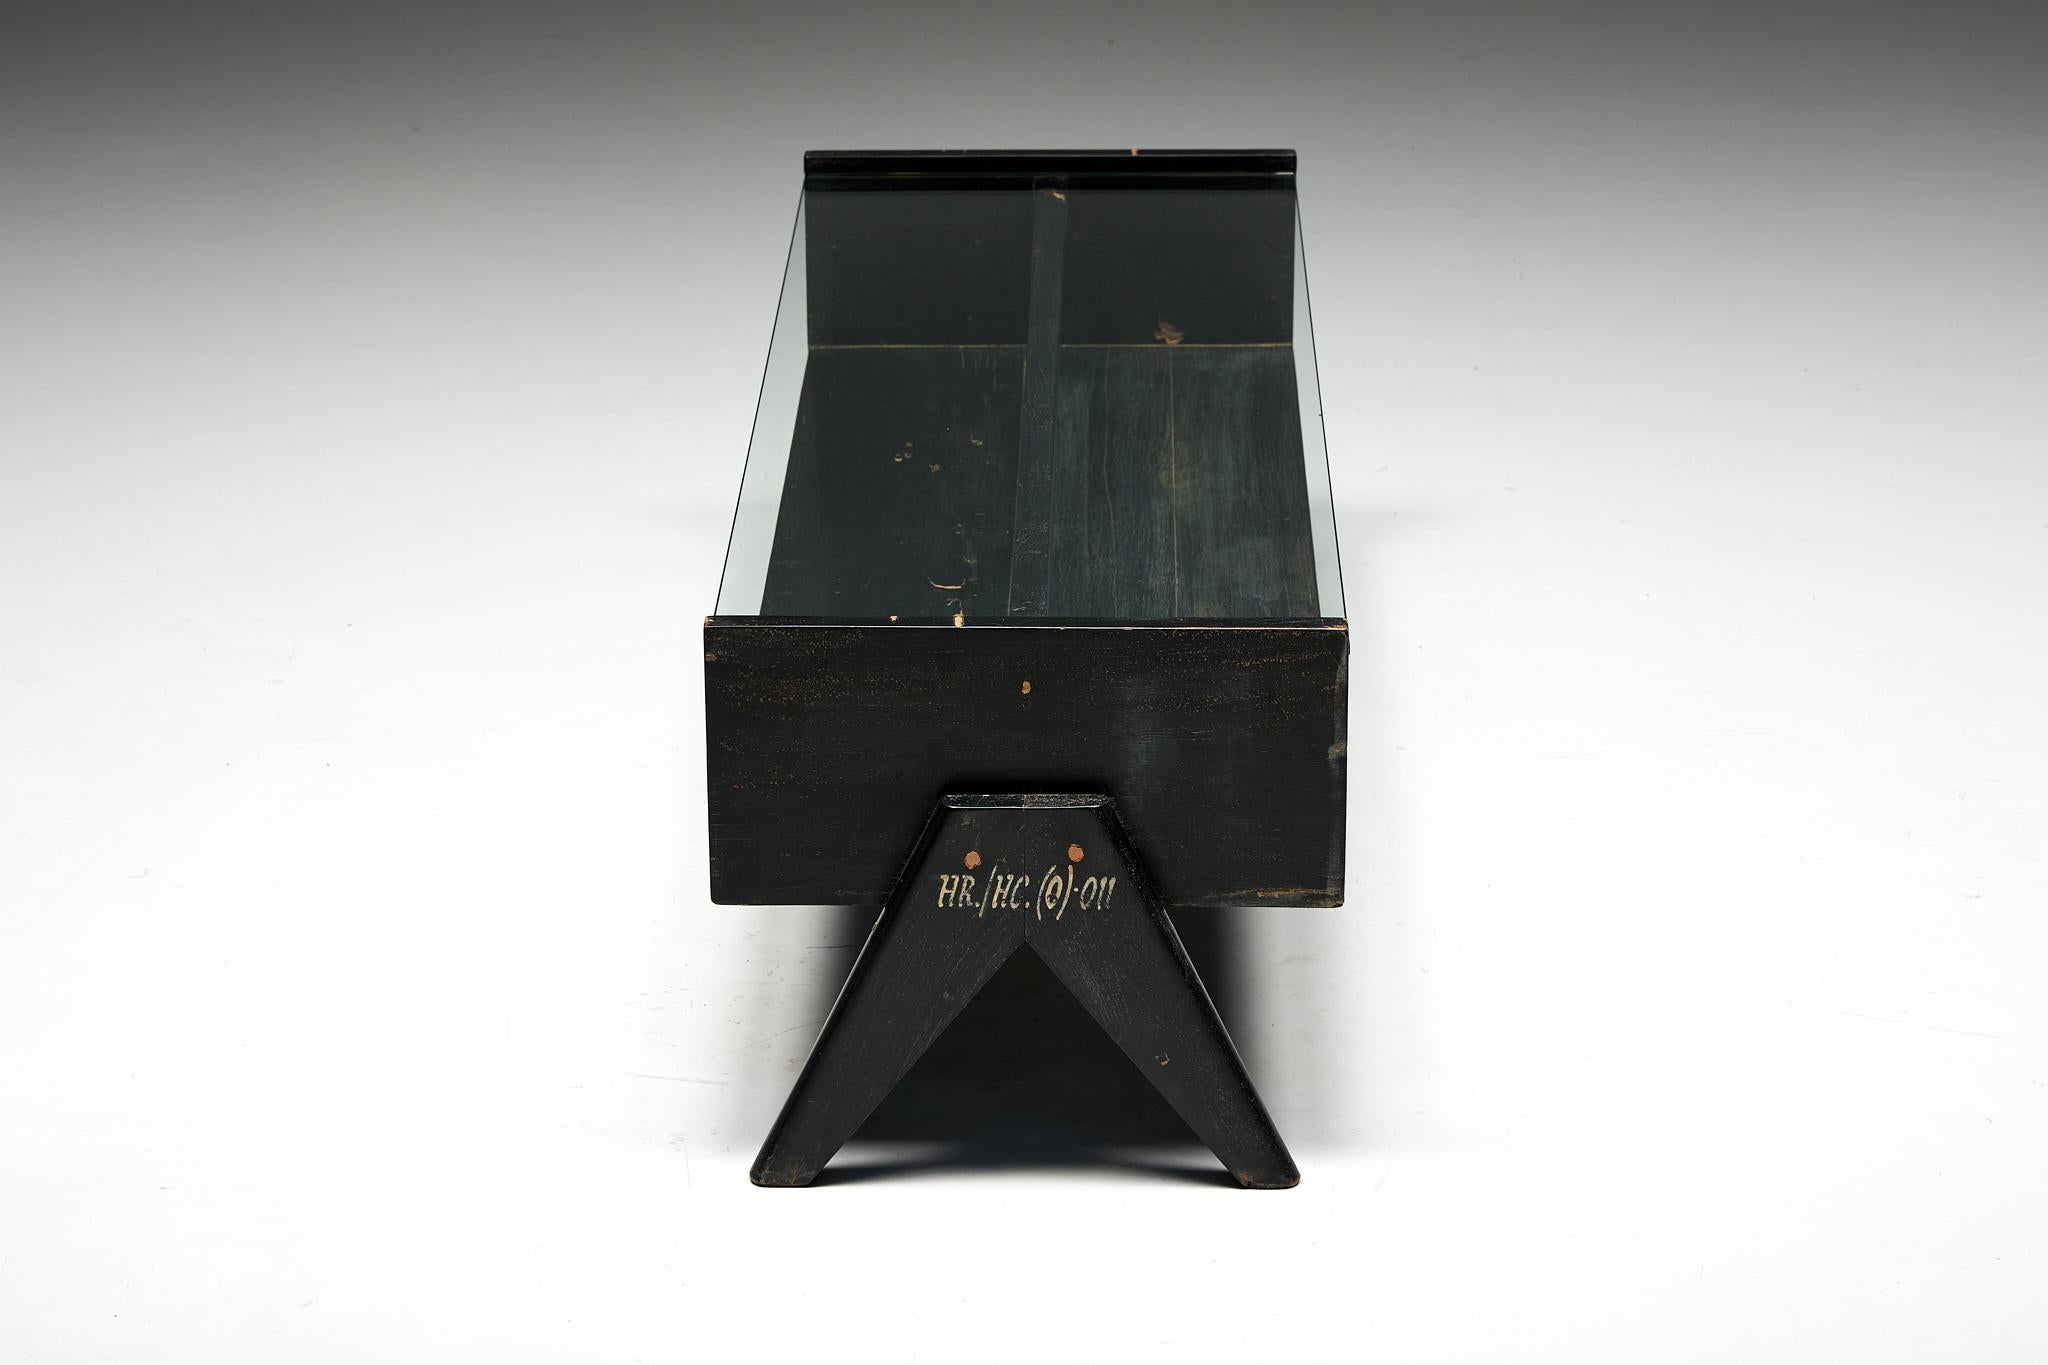 Pierre Jeanneret; India; Chandigarh; Teak; Coffee Table; Lounge Table; 1960s; PJ-TB-05-B; Le Corbusier;

Pierre Jeanneret rectangular PJ-TB-05-A coffee table from the 1960s, featuring black lacquered wood and a sleek glass tabletop. The glass